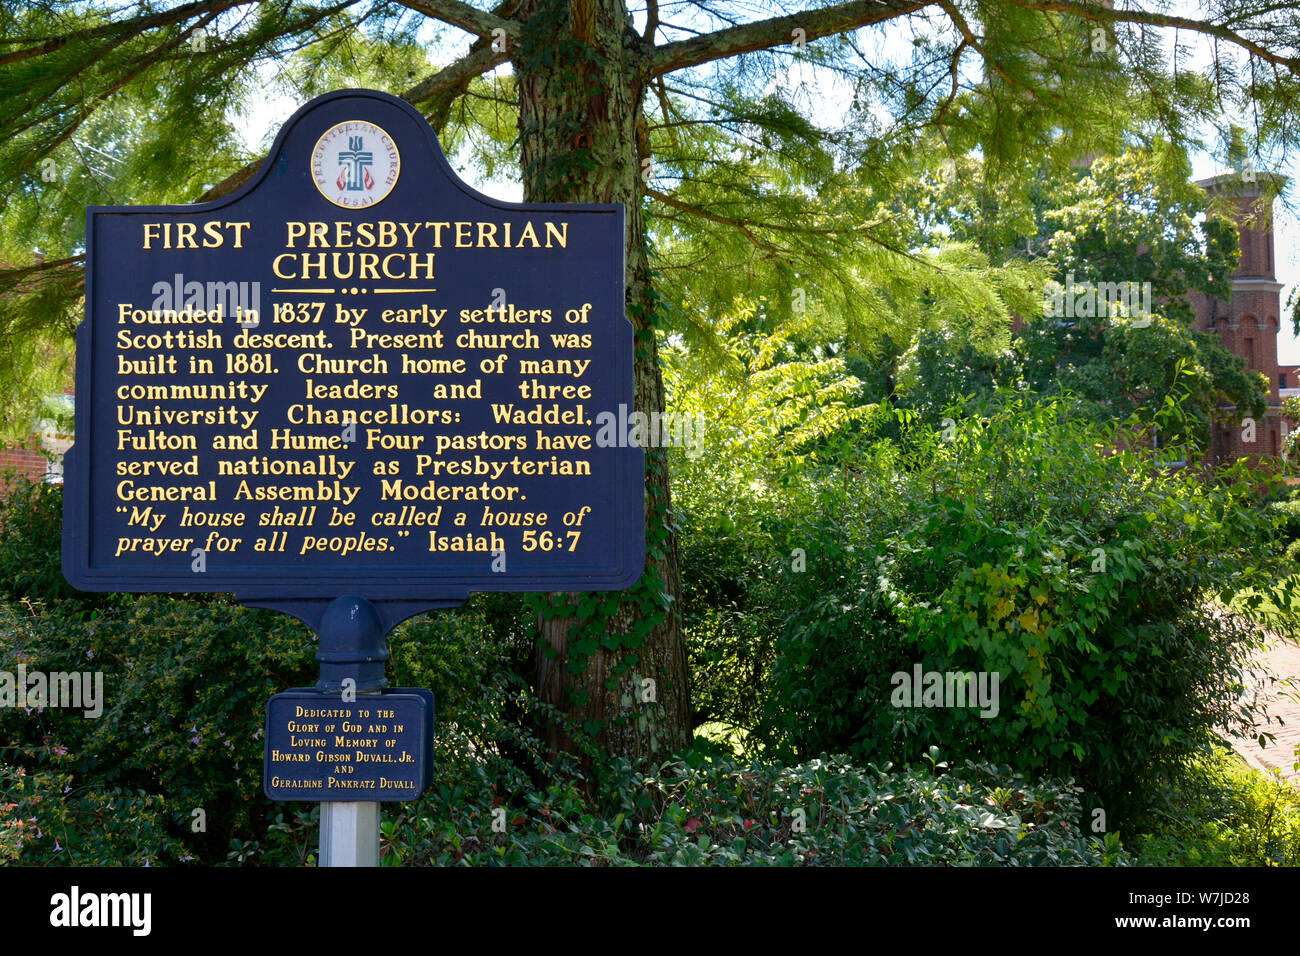 A historical marker near the site of the founding of the First Presbyterian church in Oxford, MS, USA Stock Photo